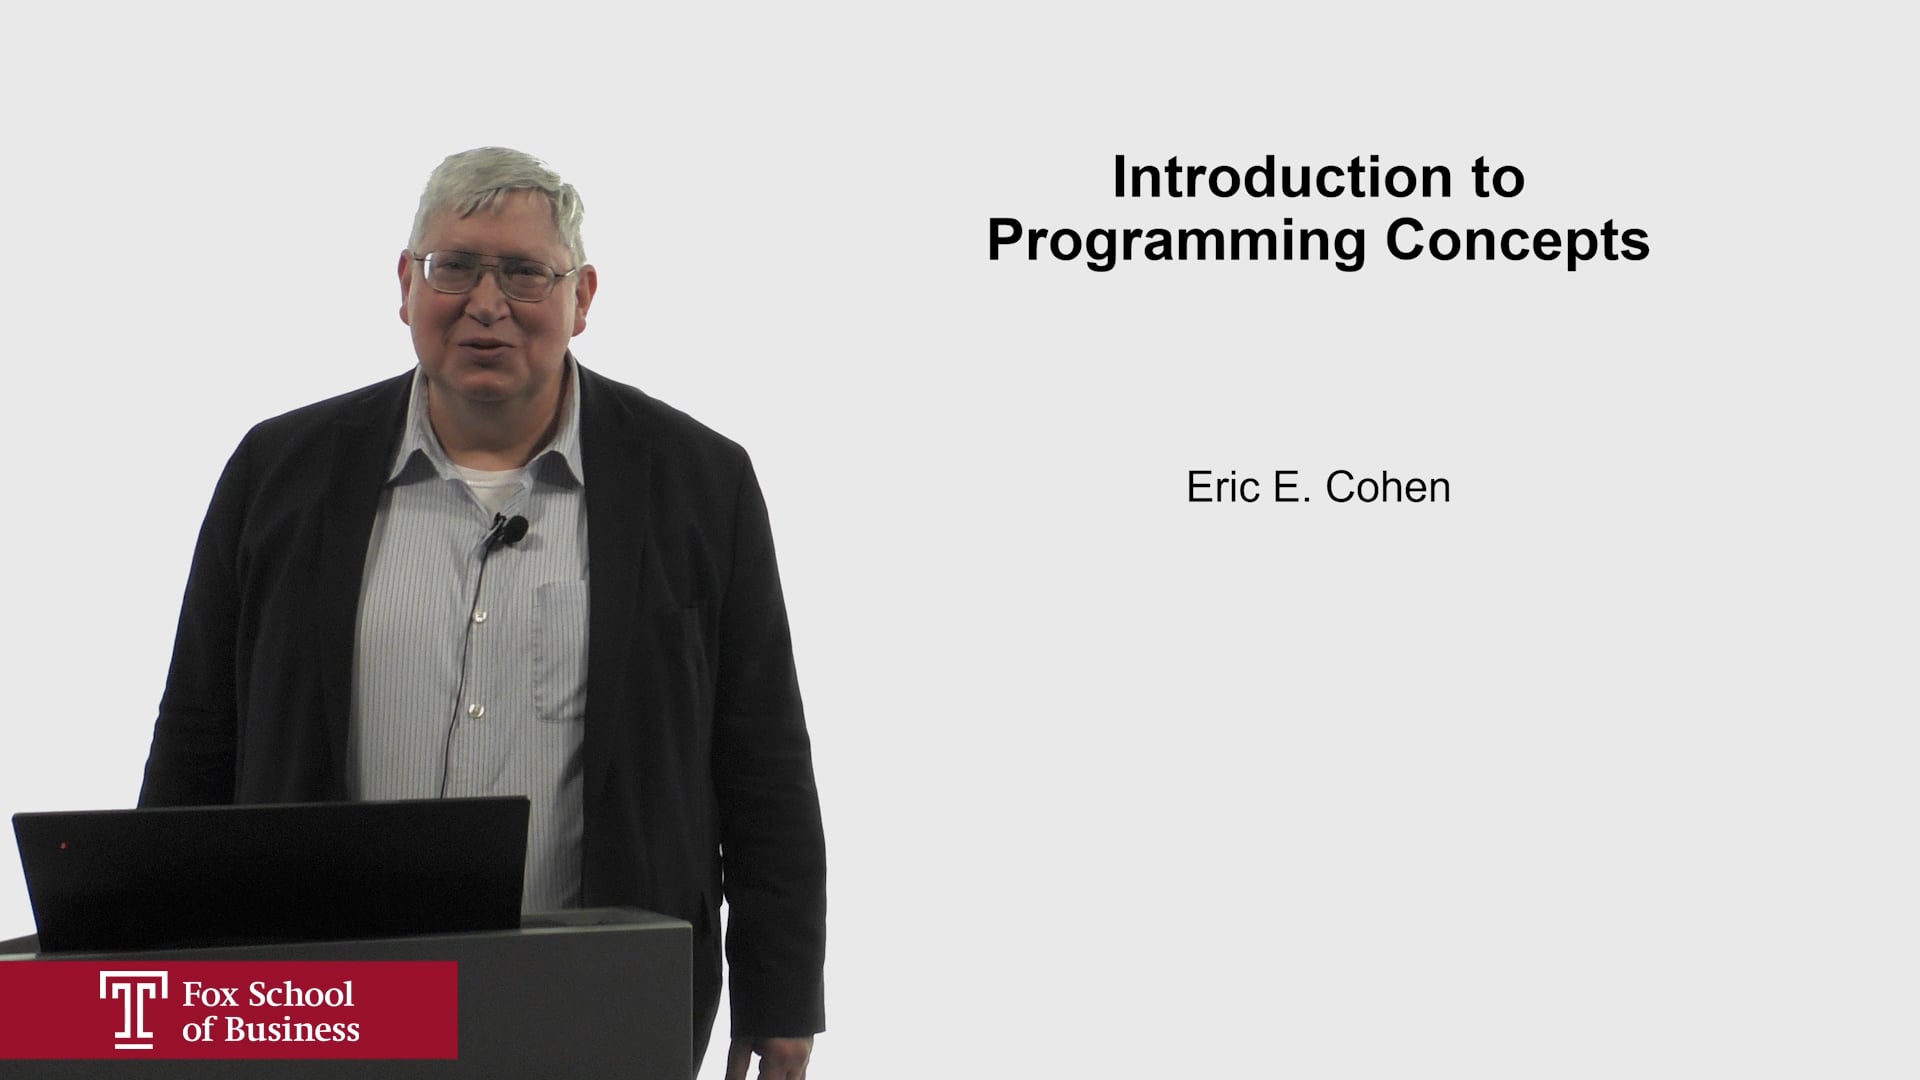 Introduction to Programming Concepts